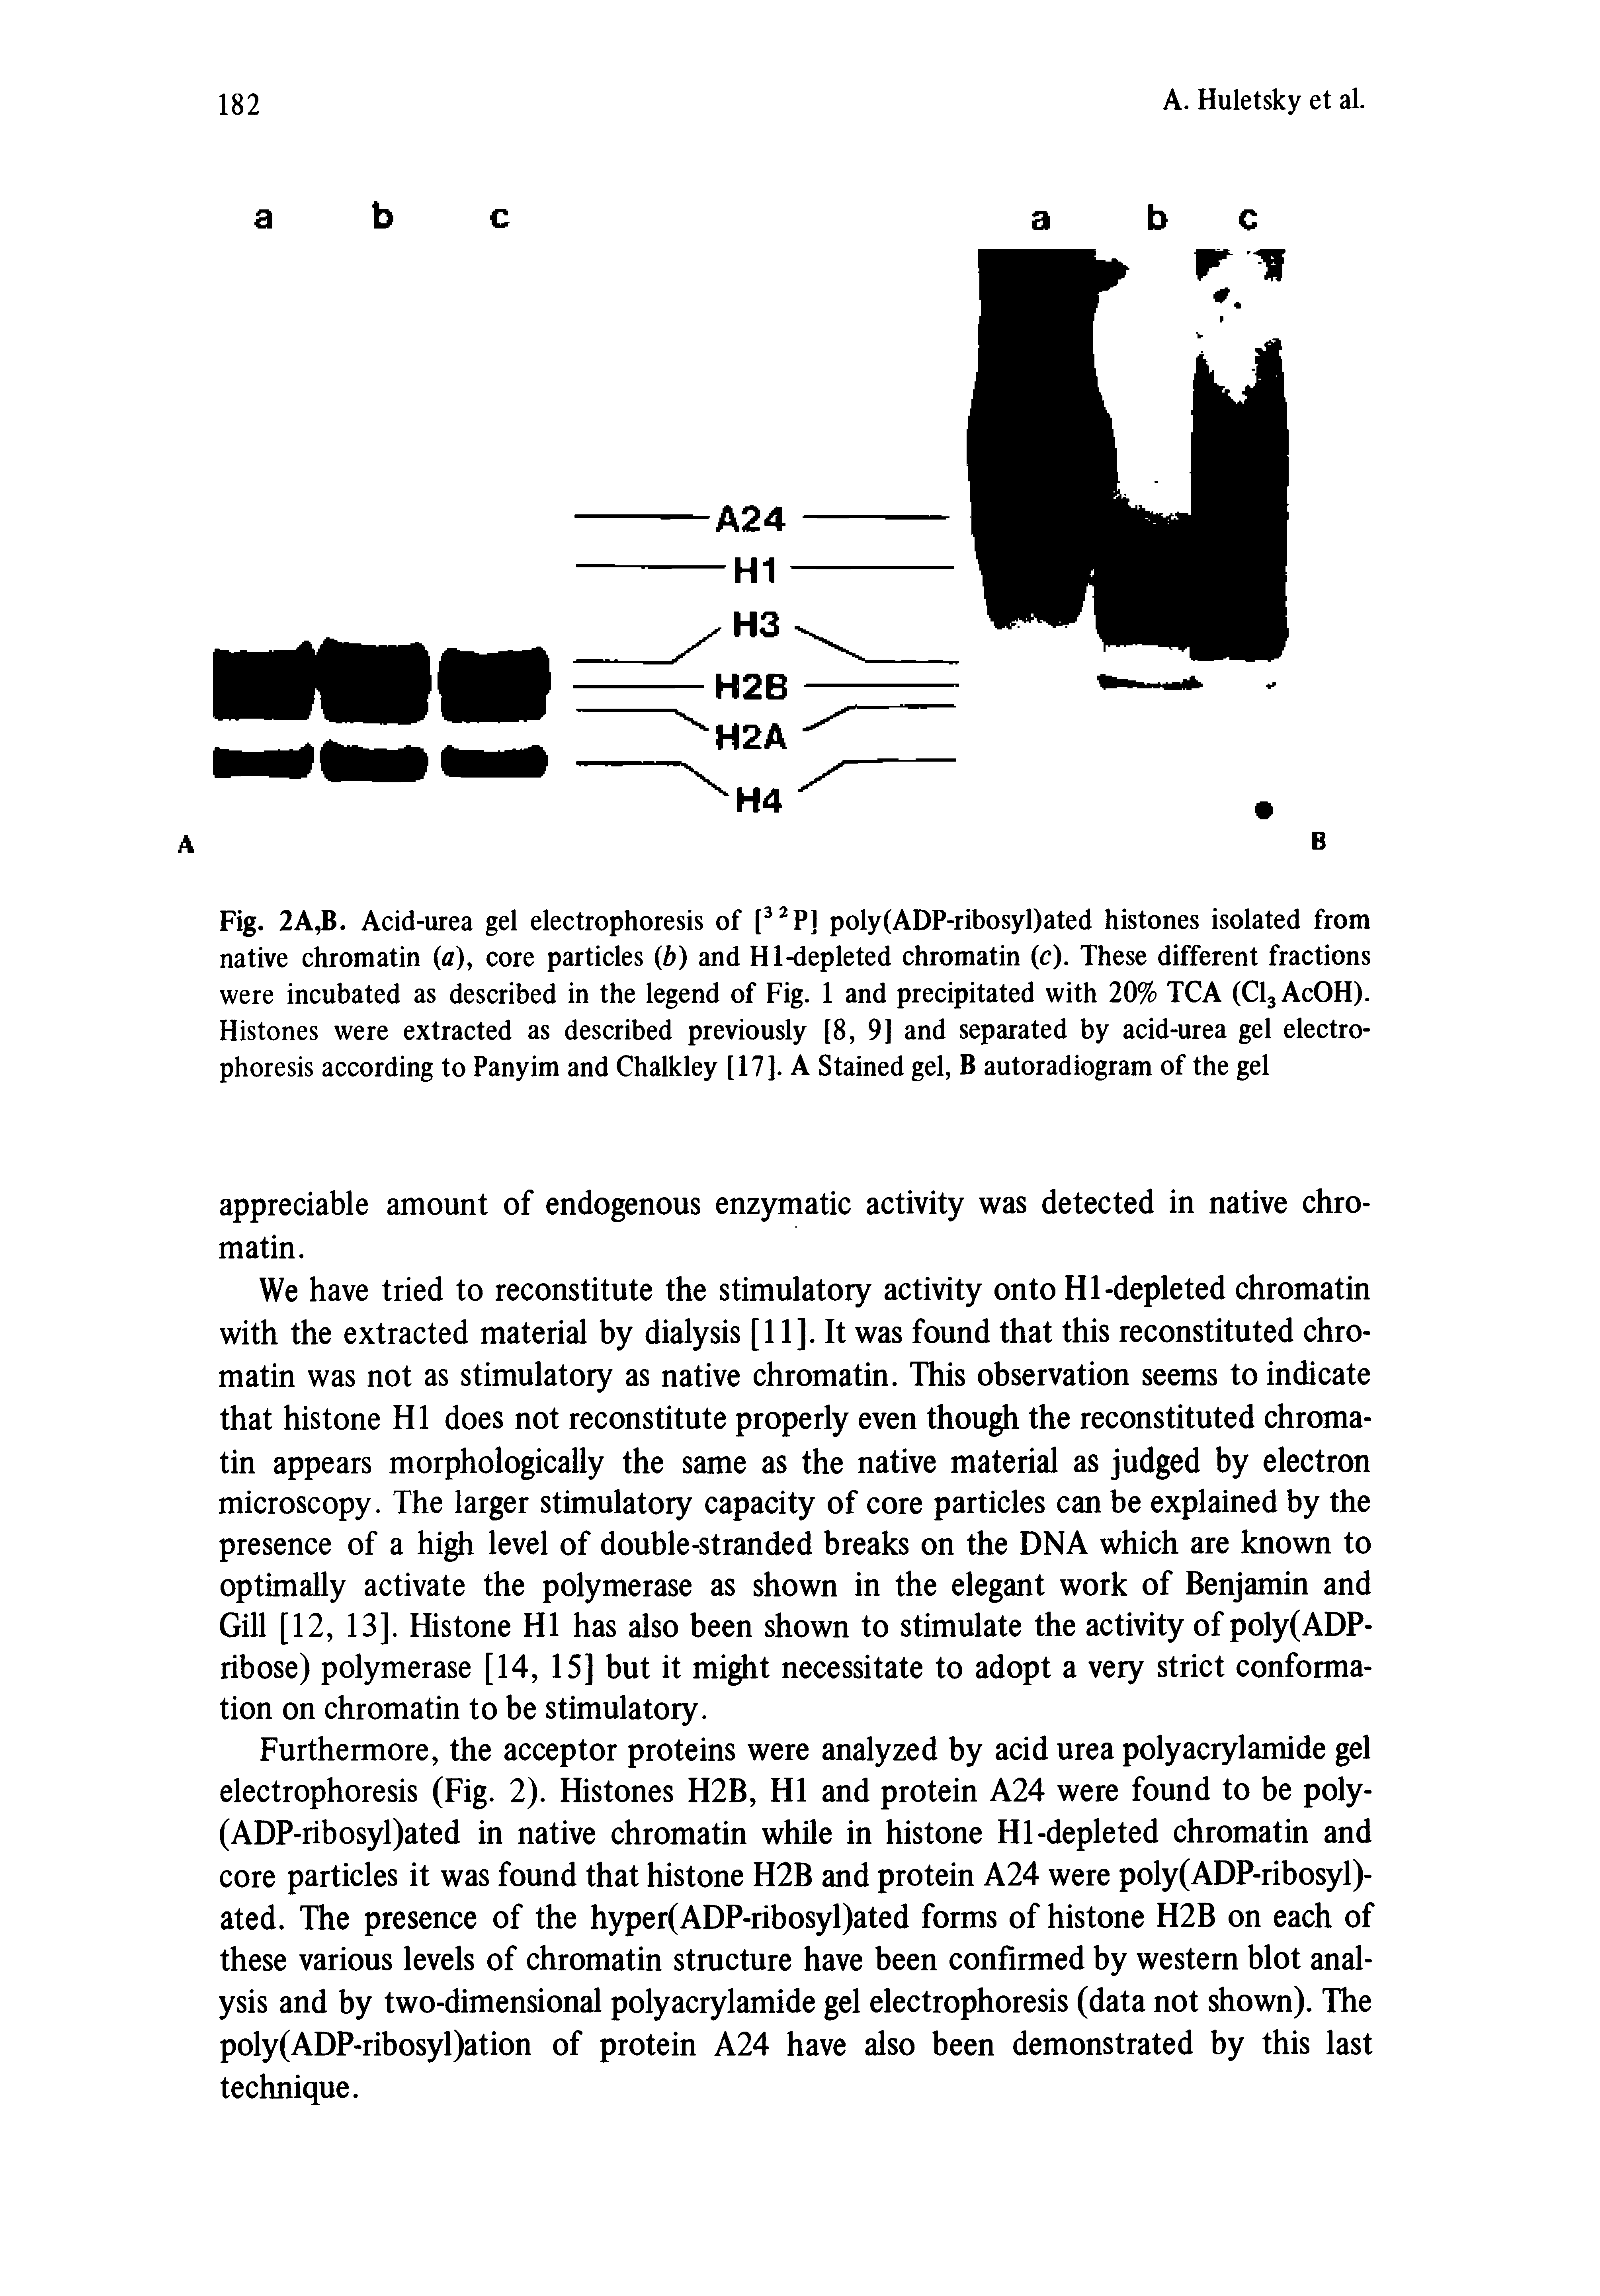 Fig. 2A,B. Acid-urea gel electrophoresis of [ Pj poly(ADP-ribosyl)ated histones isolated from native chromatin (at), core particles b) and Hl-depleted chromatin (c). These different fractions were incubated as described in the legend of Fig. 1 and precipitated with 20% TCA (ClgAcOH). Histones were extracted as described previously [8, 9] and separated by acid-urea gel electrophoresis according to Panyim and Chalkley [17]. A Stained gel, B autoradiogram of the gel...